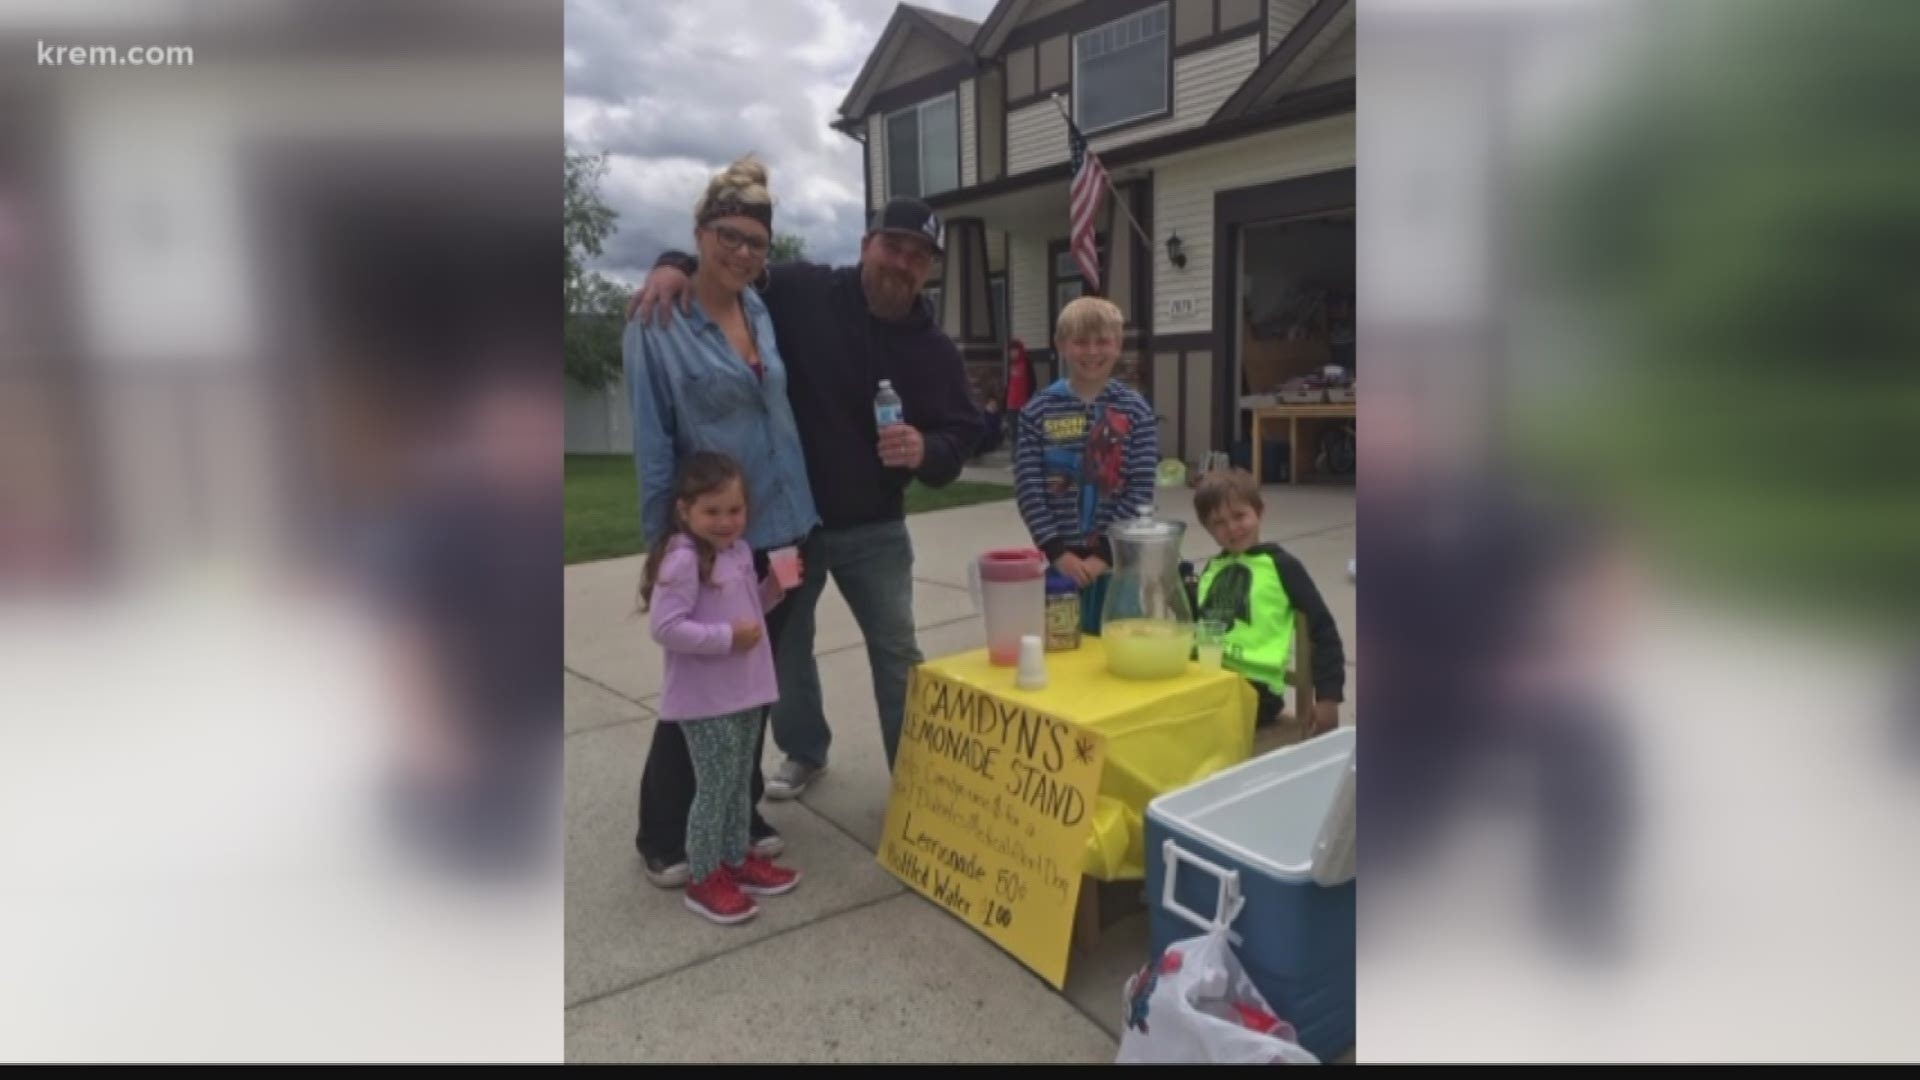 KREM Reporter Taylor Viydo spoke with a Post Falls family whose son sold over $3,000 in lemonade to pay for a diabetic alert dog.